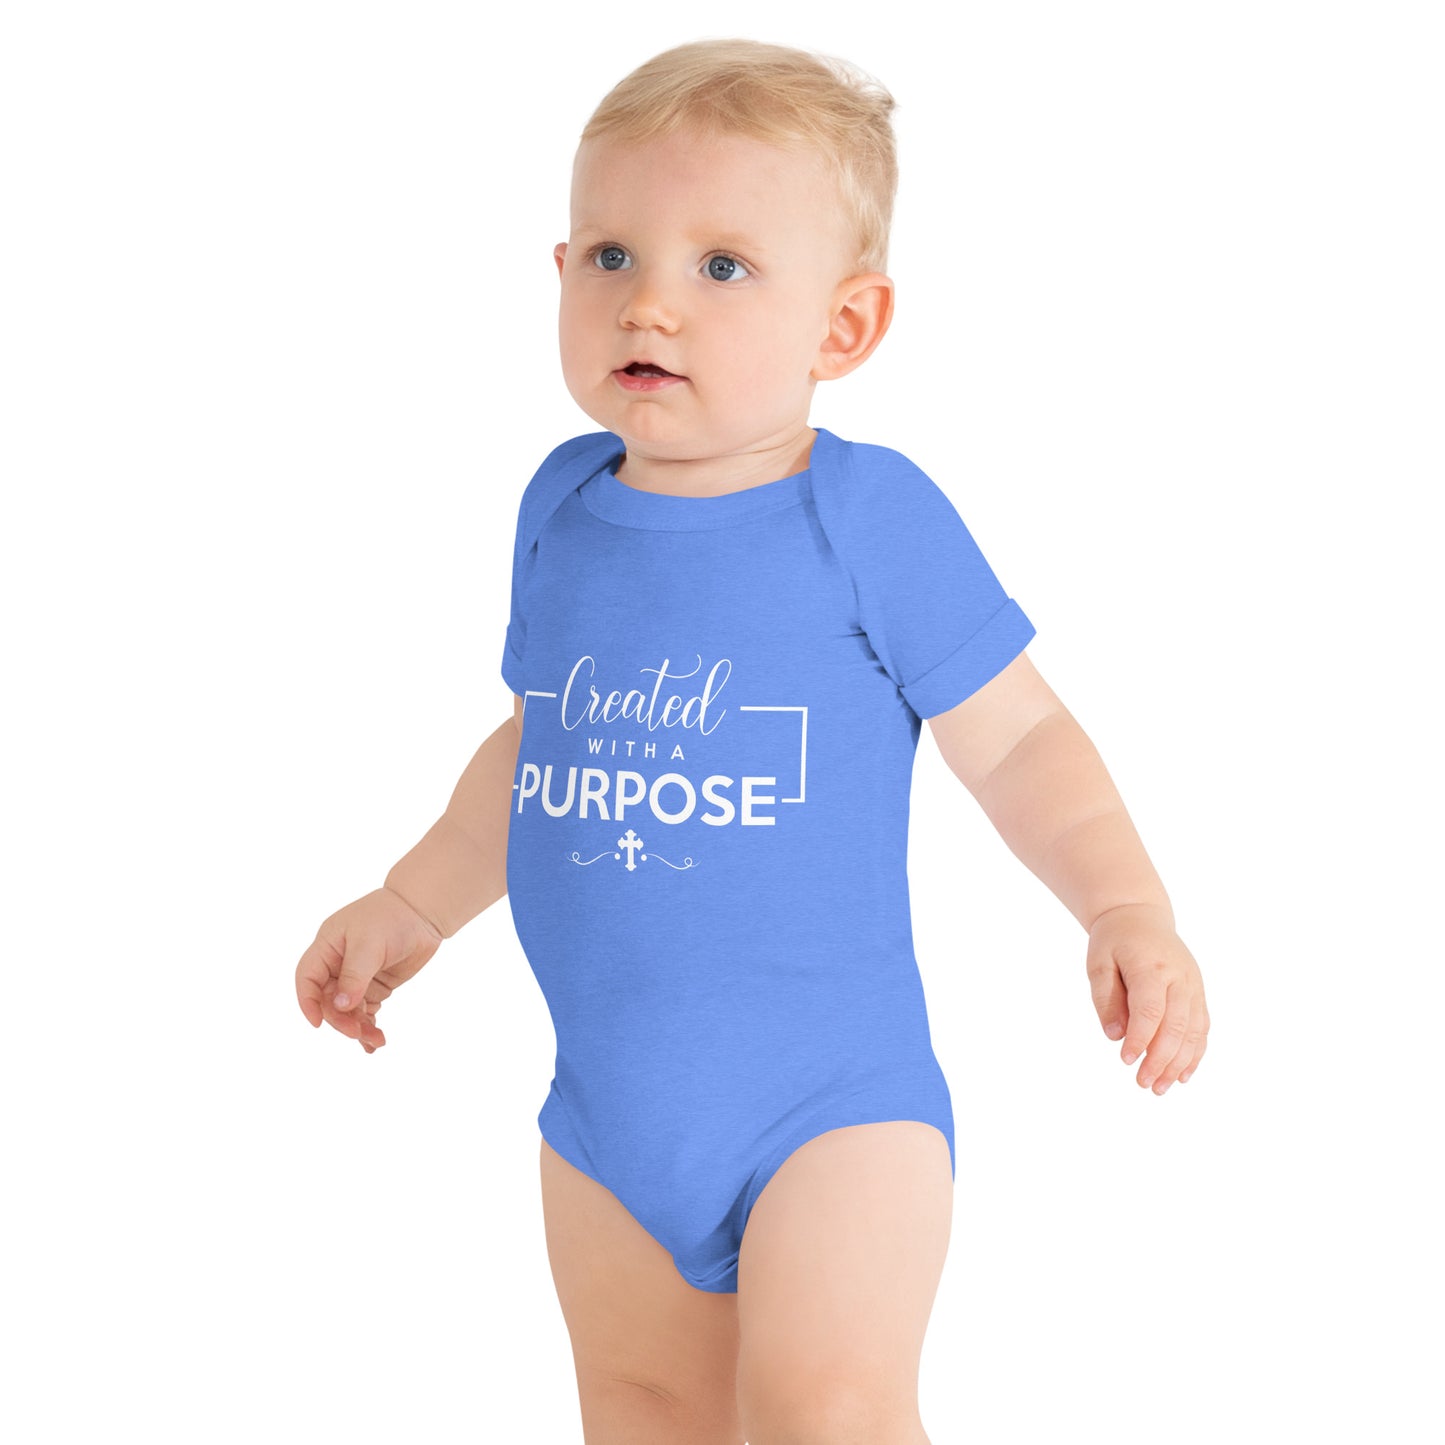 Created with a purpose Baby short sleeve one piece